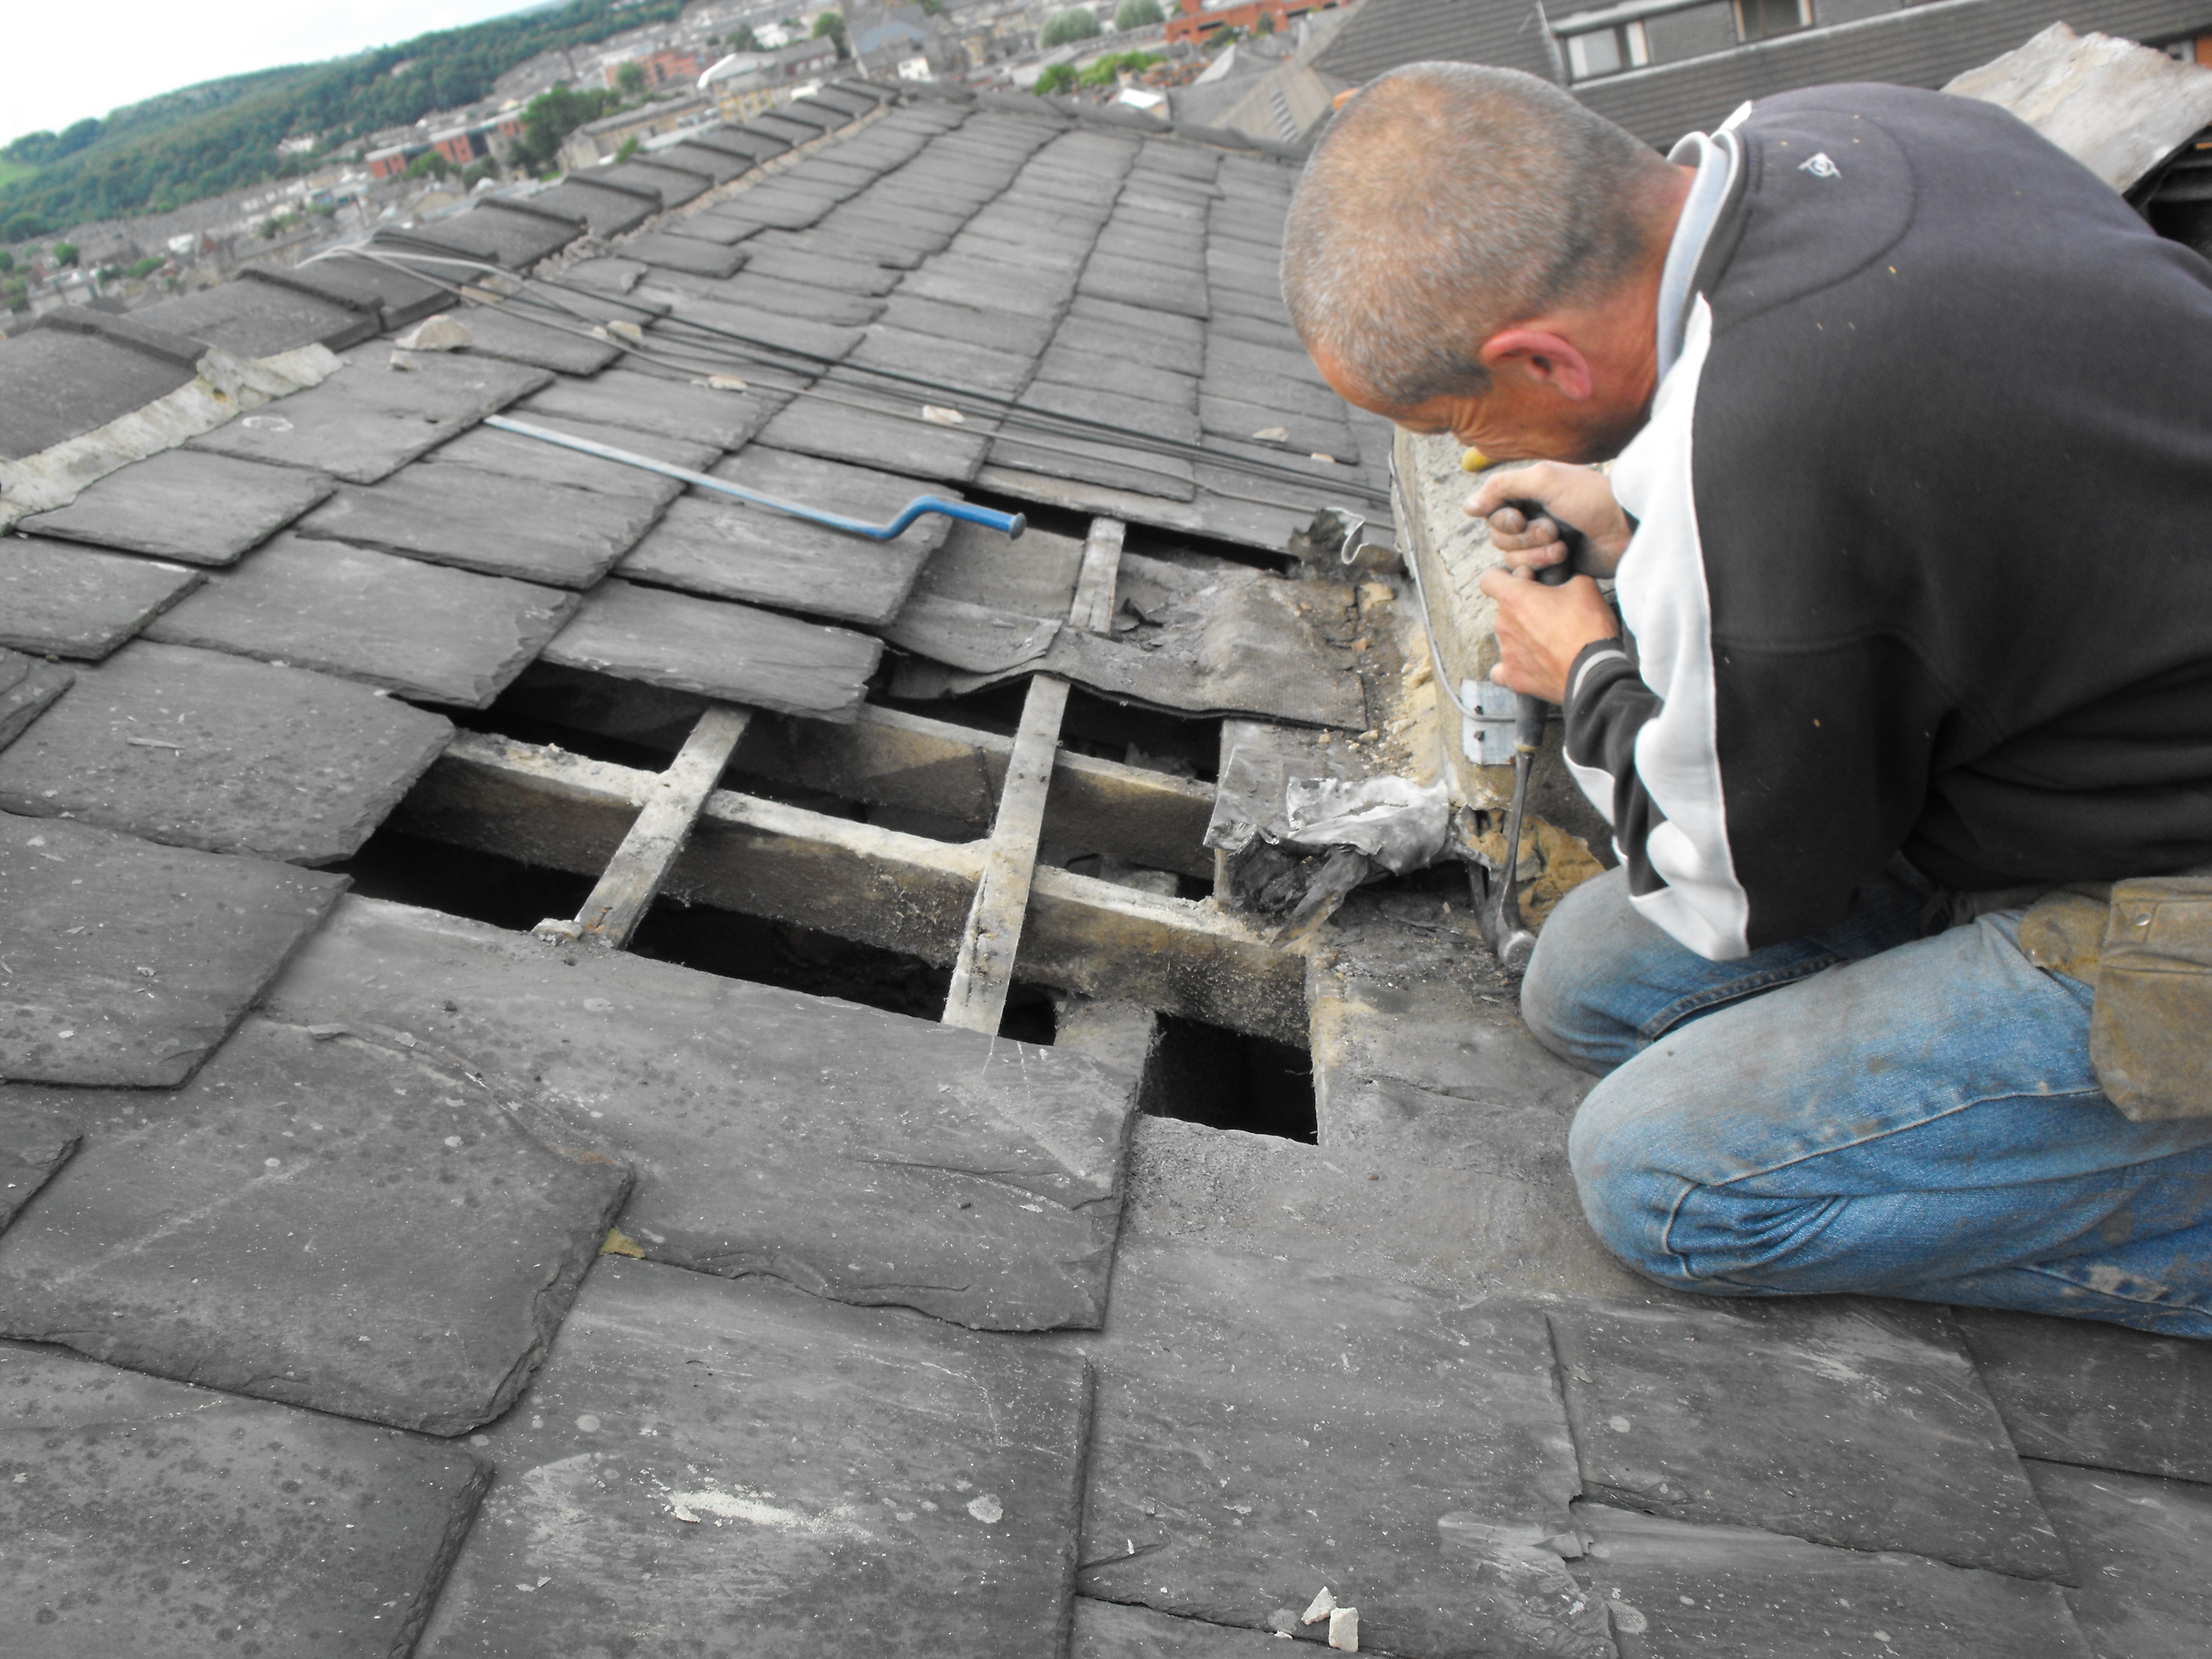 Repair and Insulation of Slate Roof | Roofing Insulation Services ...